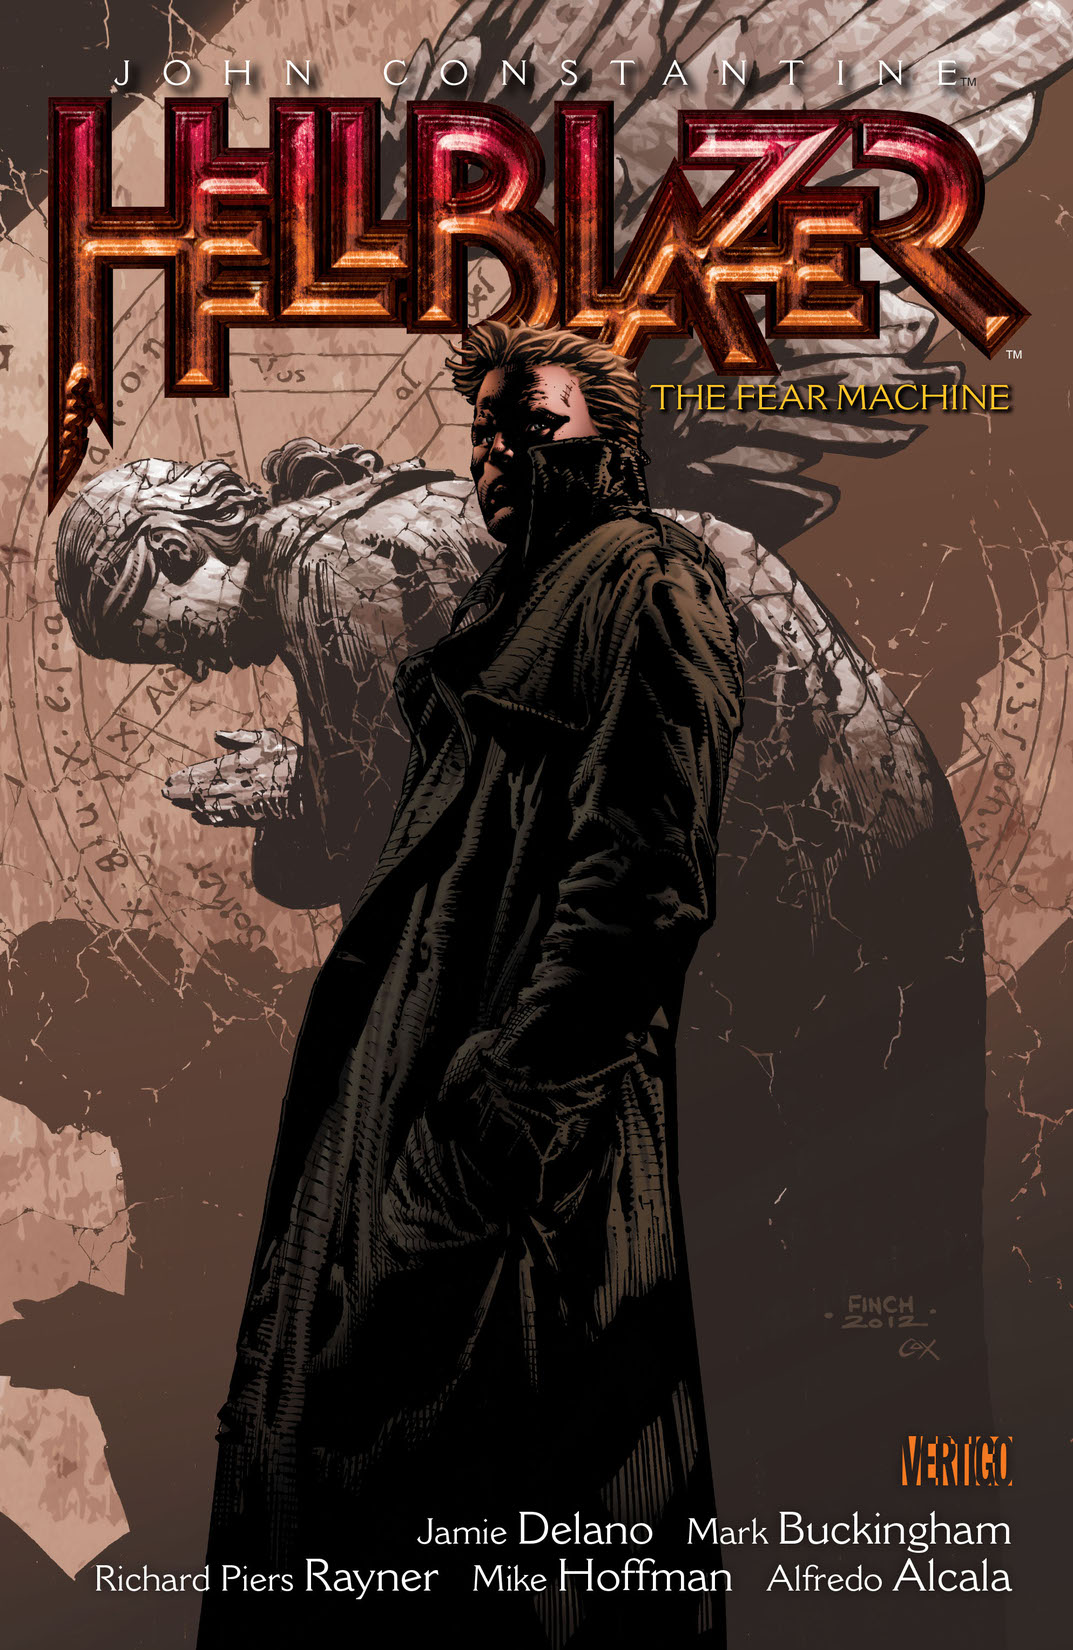 John Constantine Hellblazer Vol. 3: The Fear Machine (New Edition) preview images